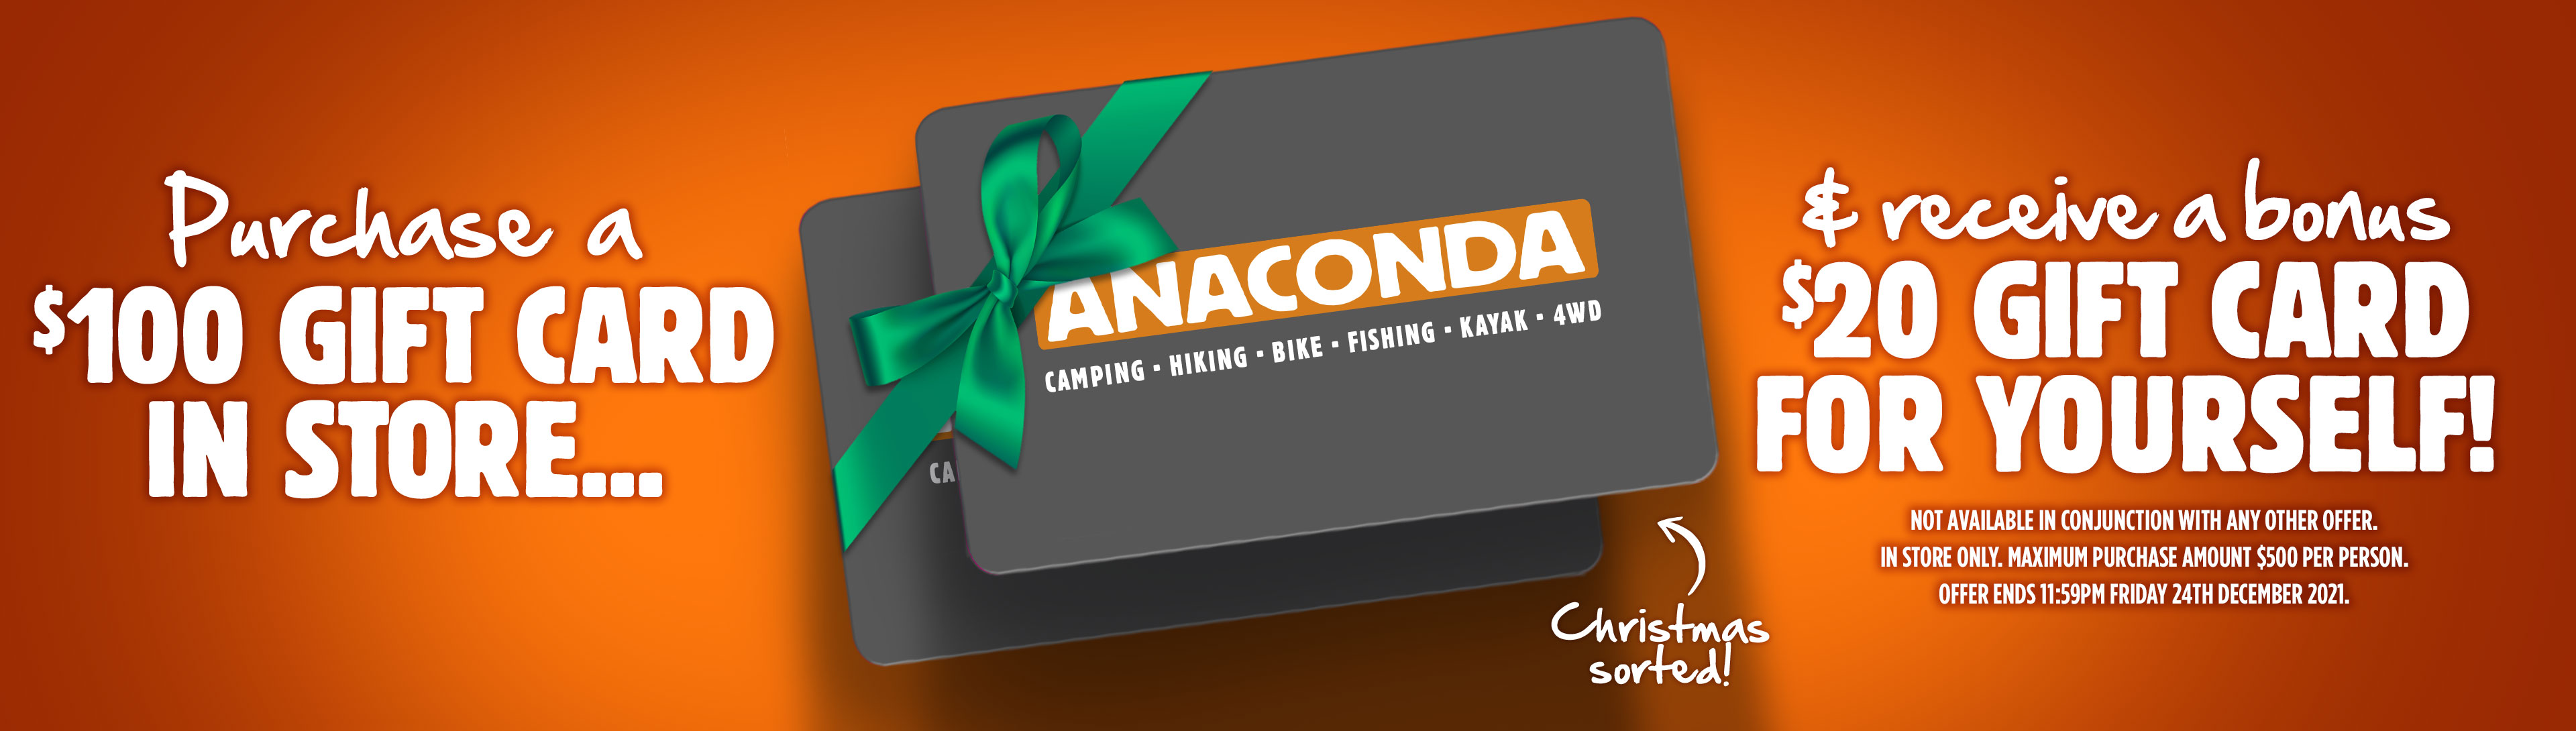 Anaconda Bonus $20 gift card when you purchase a $100 gift card(In-store only)